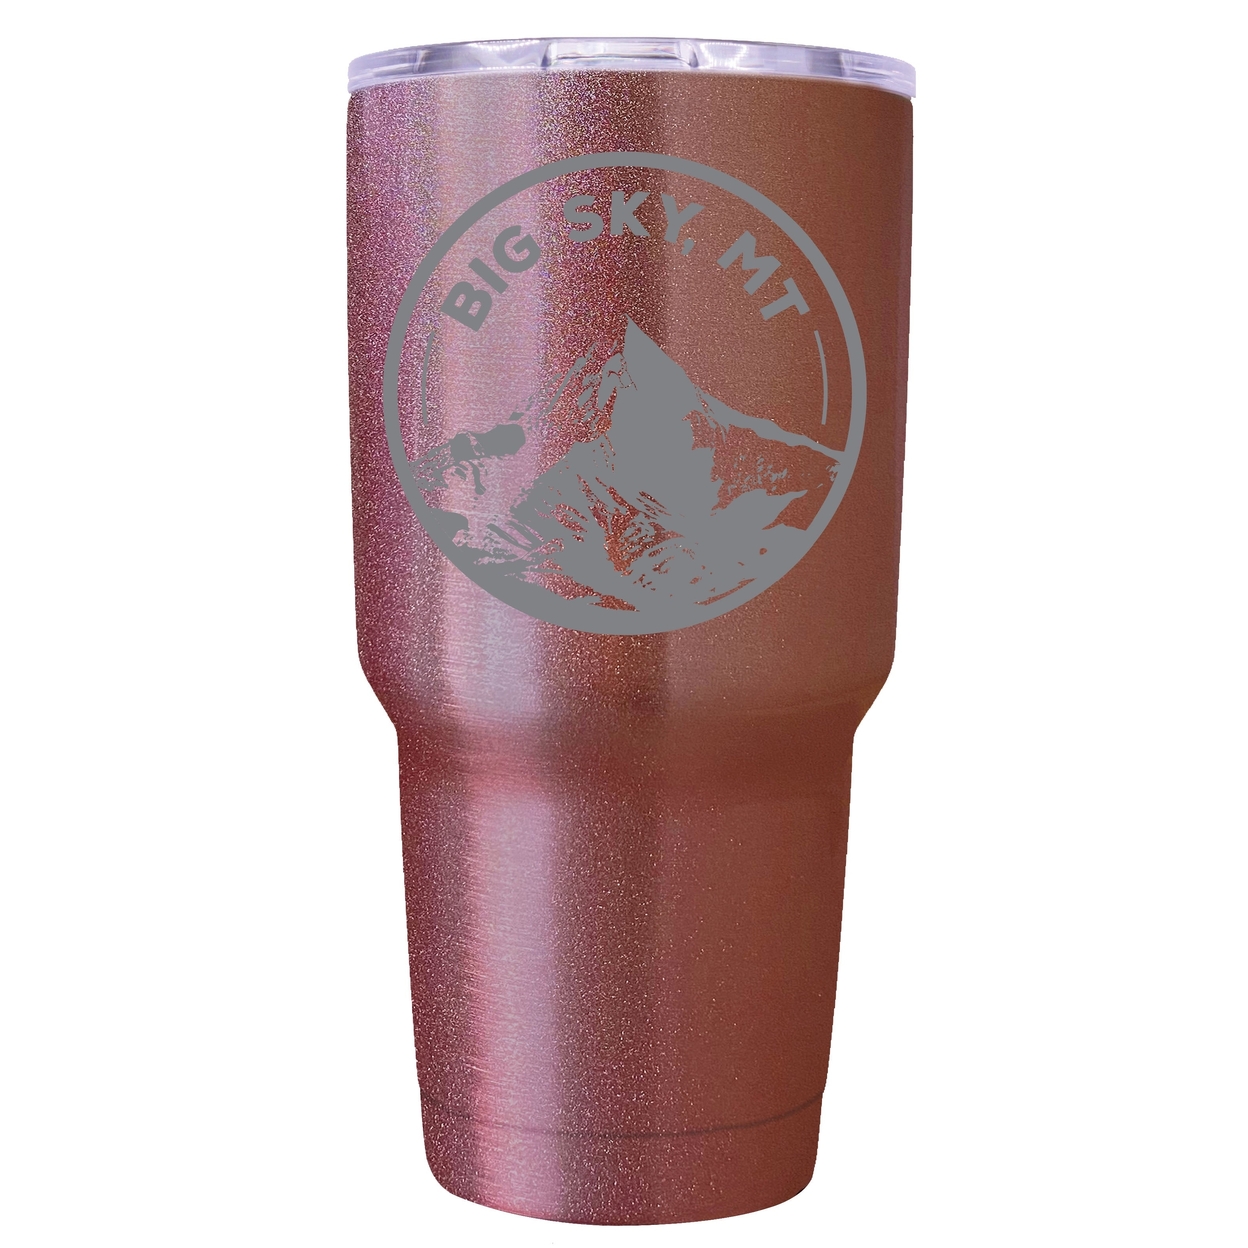 Big Sky Montana Souvenir 24 Oz Engraved Insulated Stainless Steel Tumbler - Rose Gold,,Single Unit